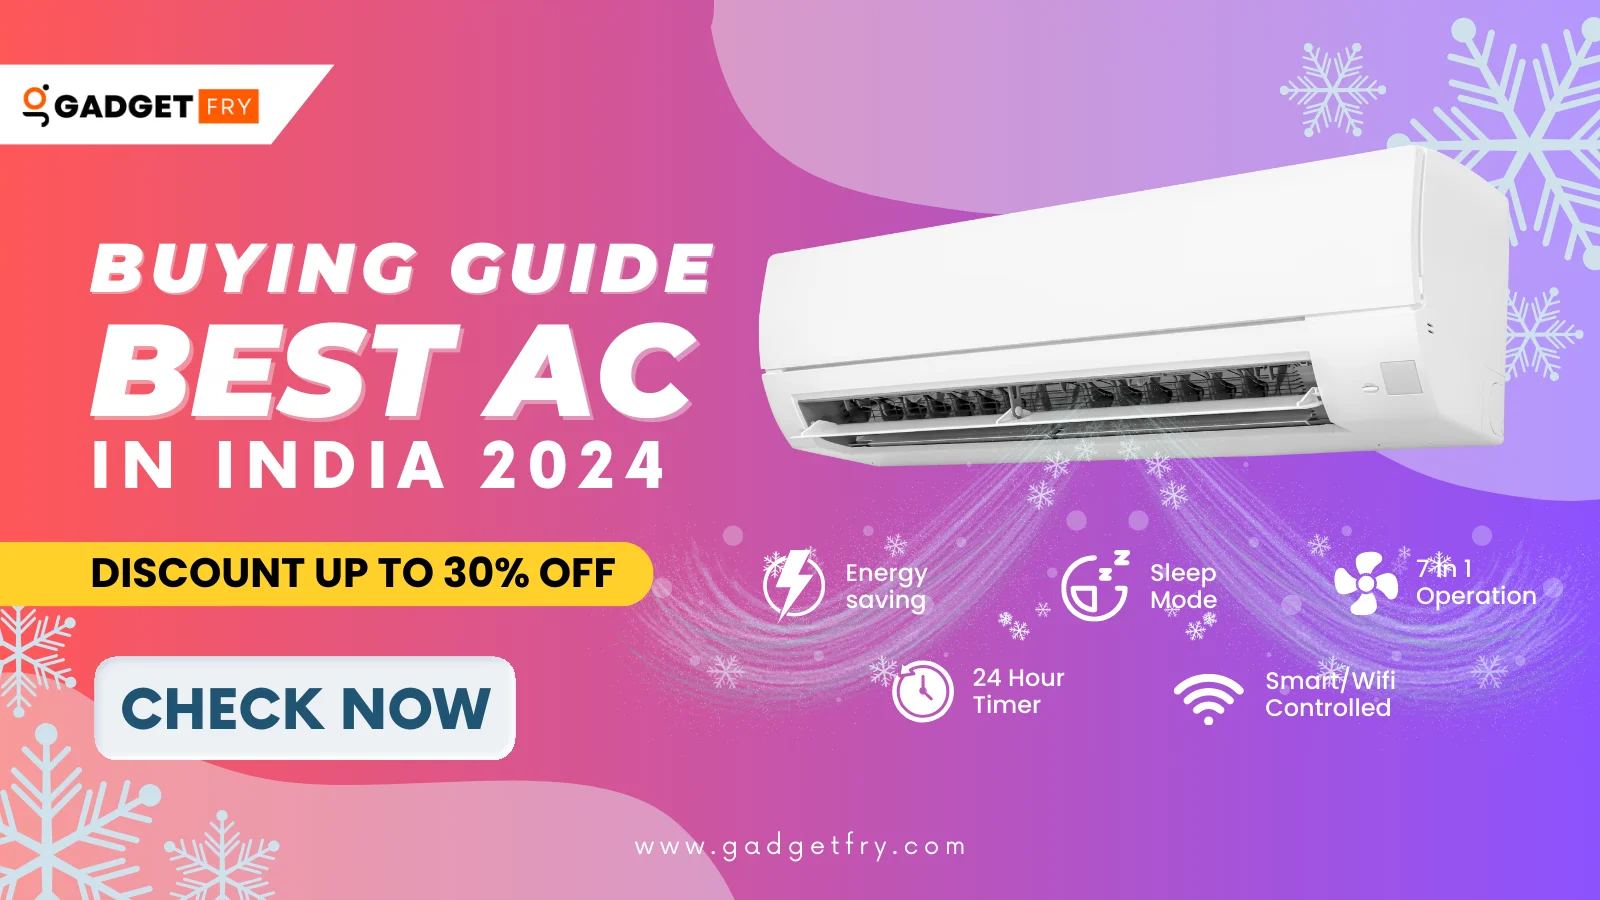 best Air Conditioning in India